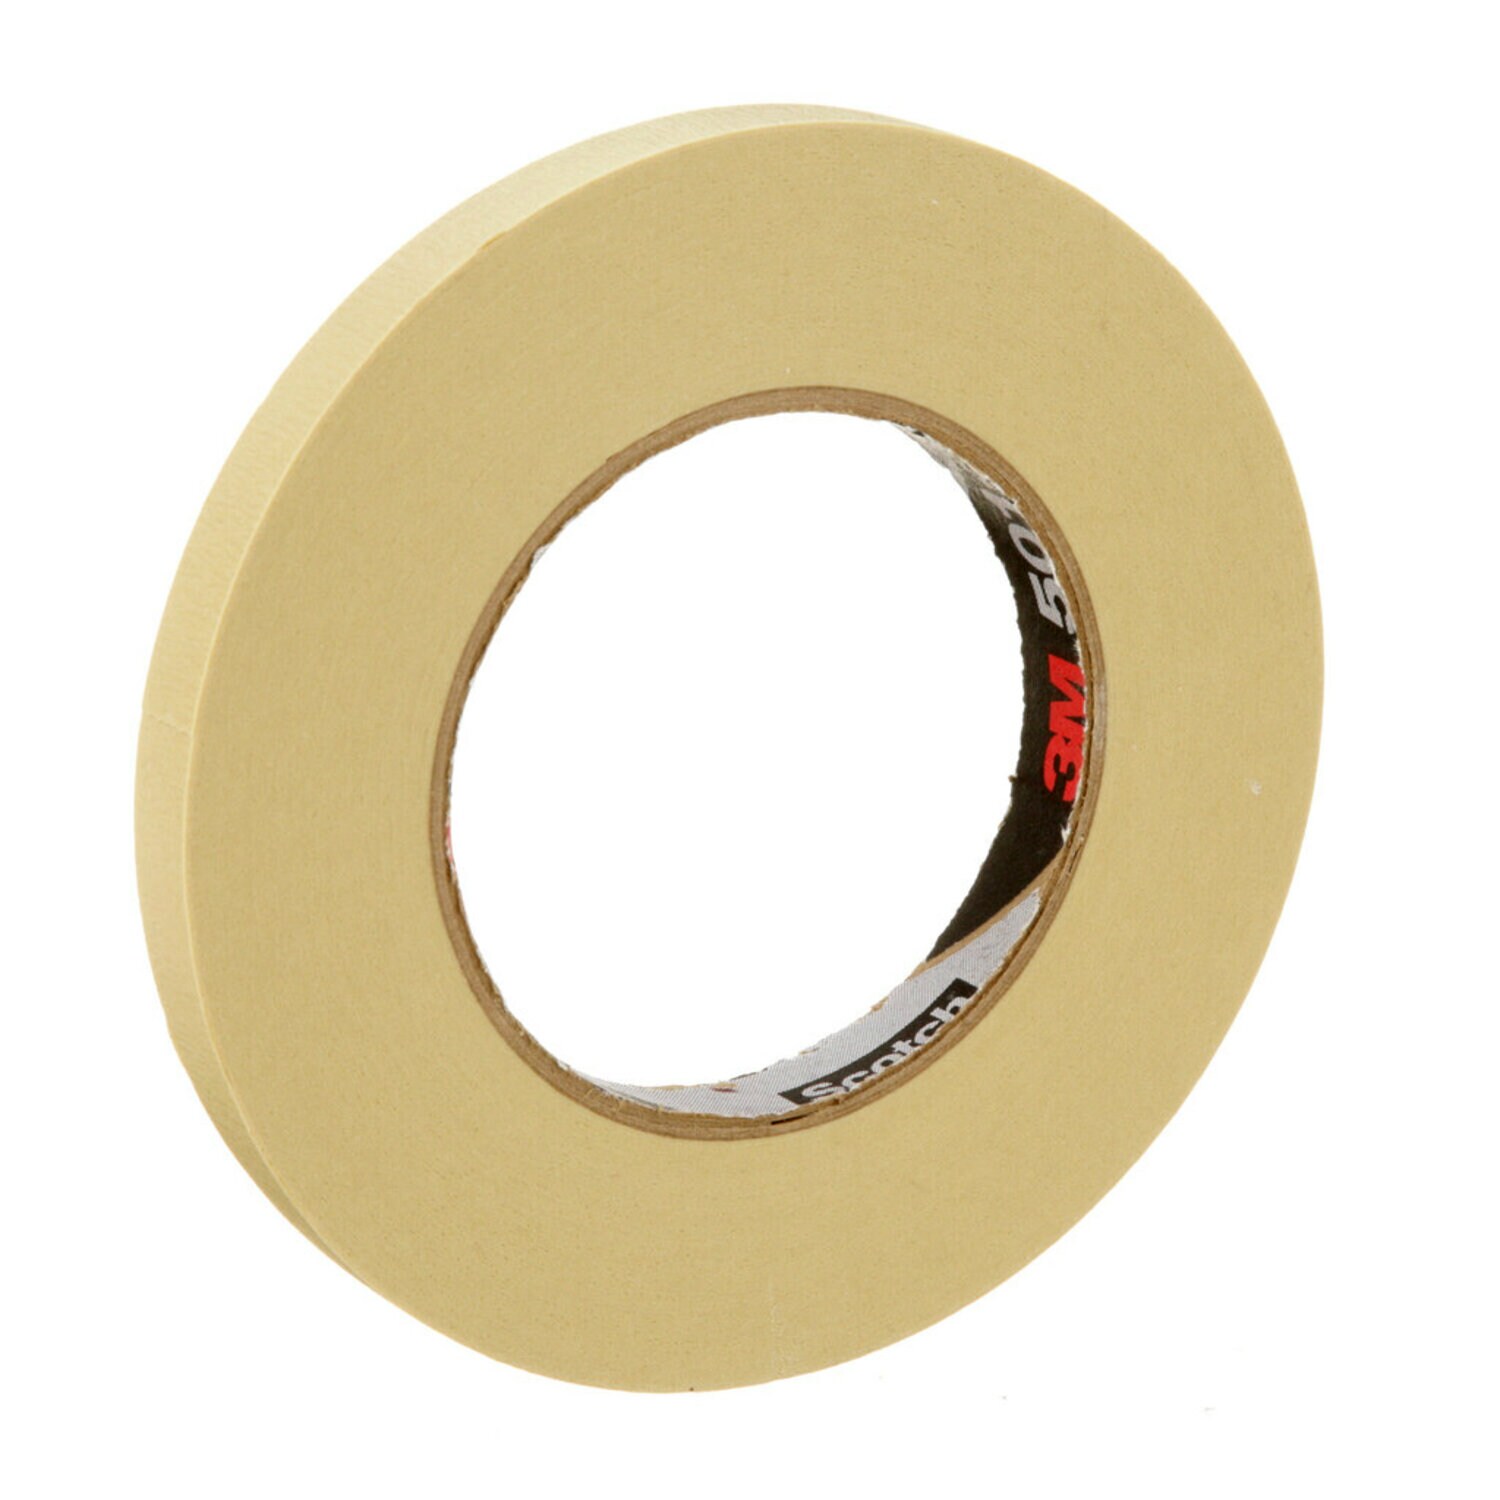 7100109550 - 3M Specialty High Temperature Masking Tape 501+, Tan, 12 mm x 55 m, 7.3
mil, 72 Roll/Case